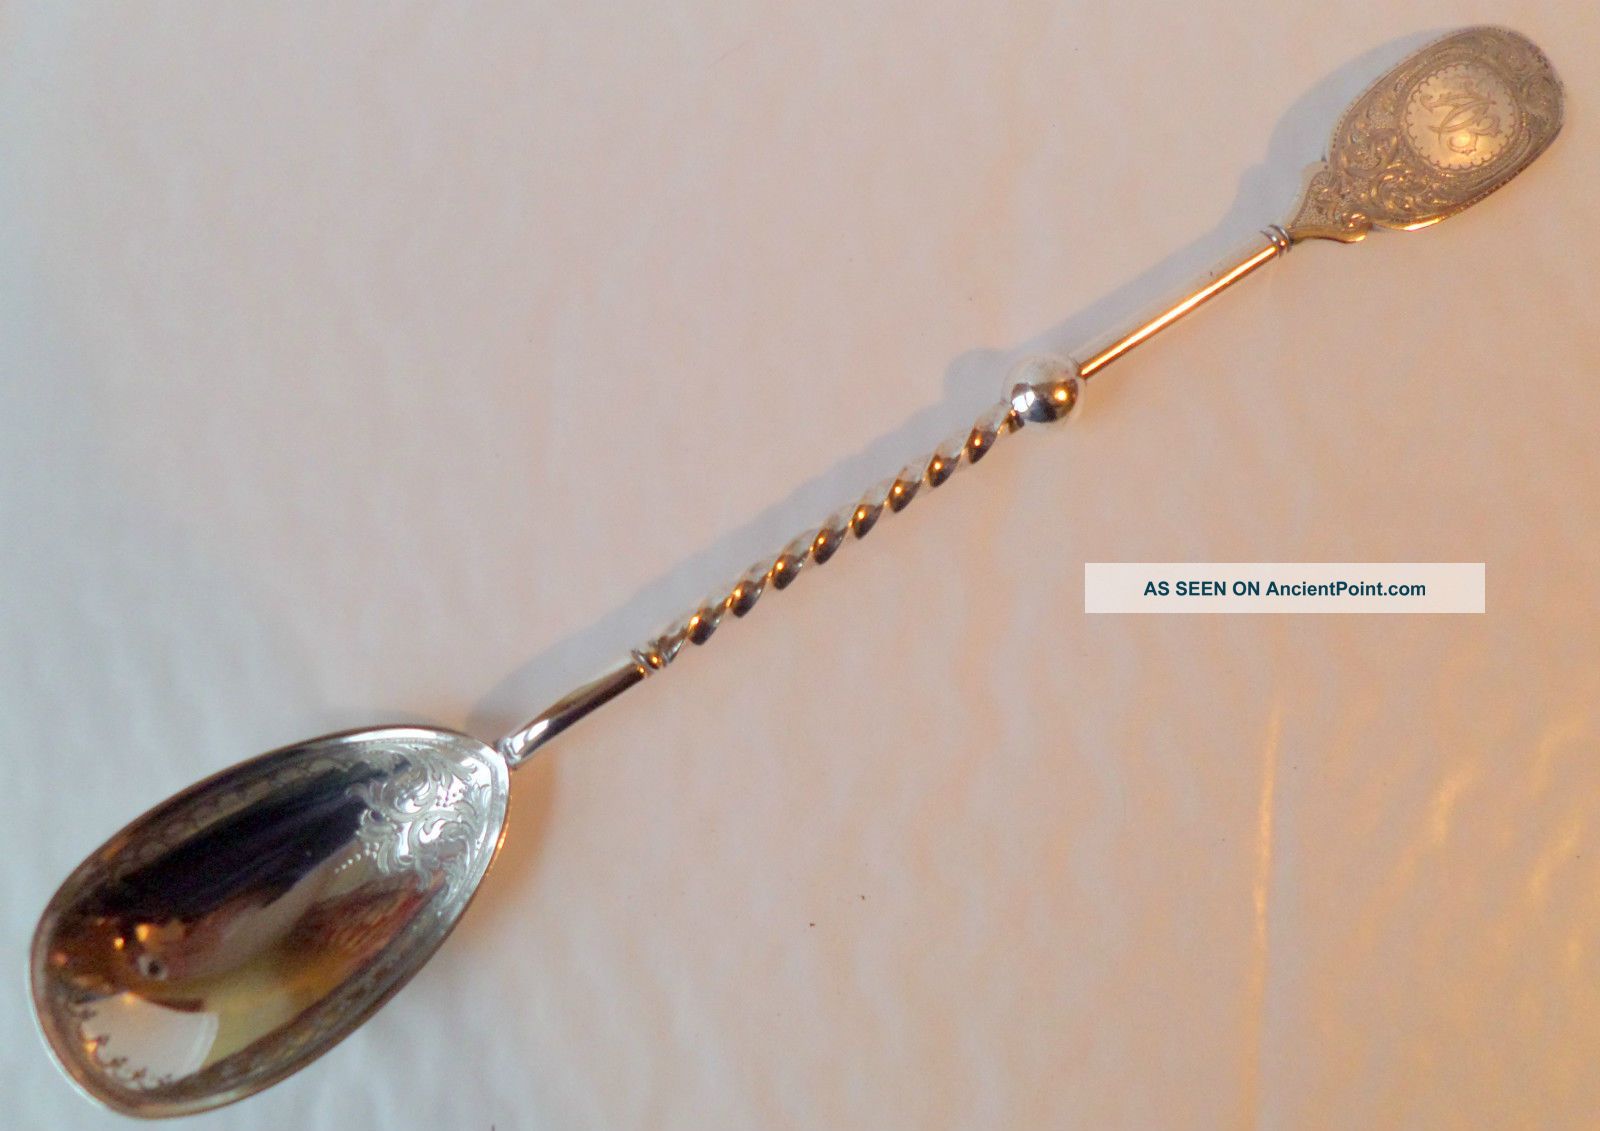 Antique Engraved Silver Plated Large Ladle - Serving Spoon 11.  1/2 